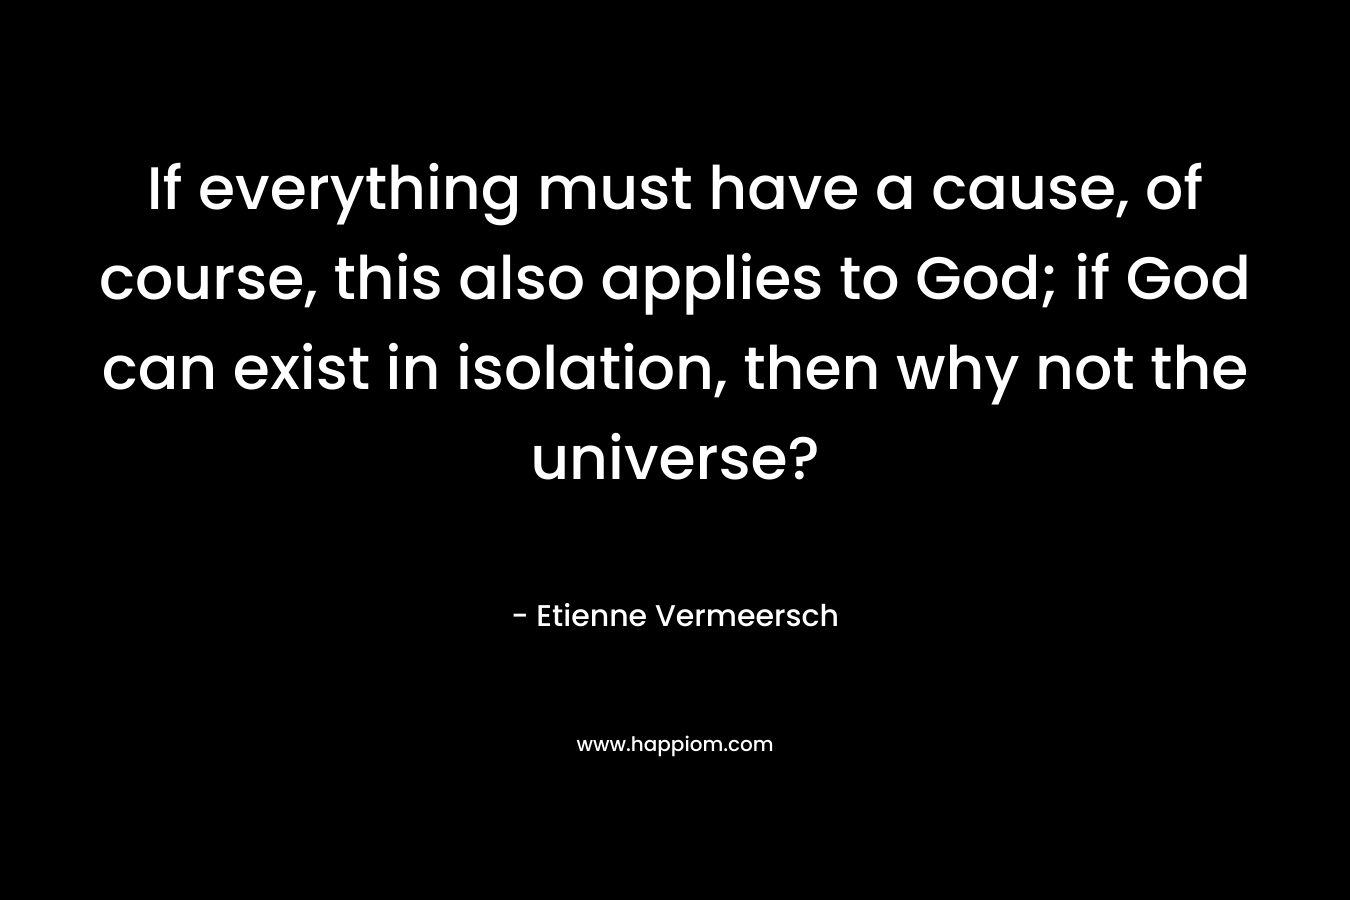 If everything must have a cause, of course, this also applies to God; if God can exist in isolation, then why not the universe?